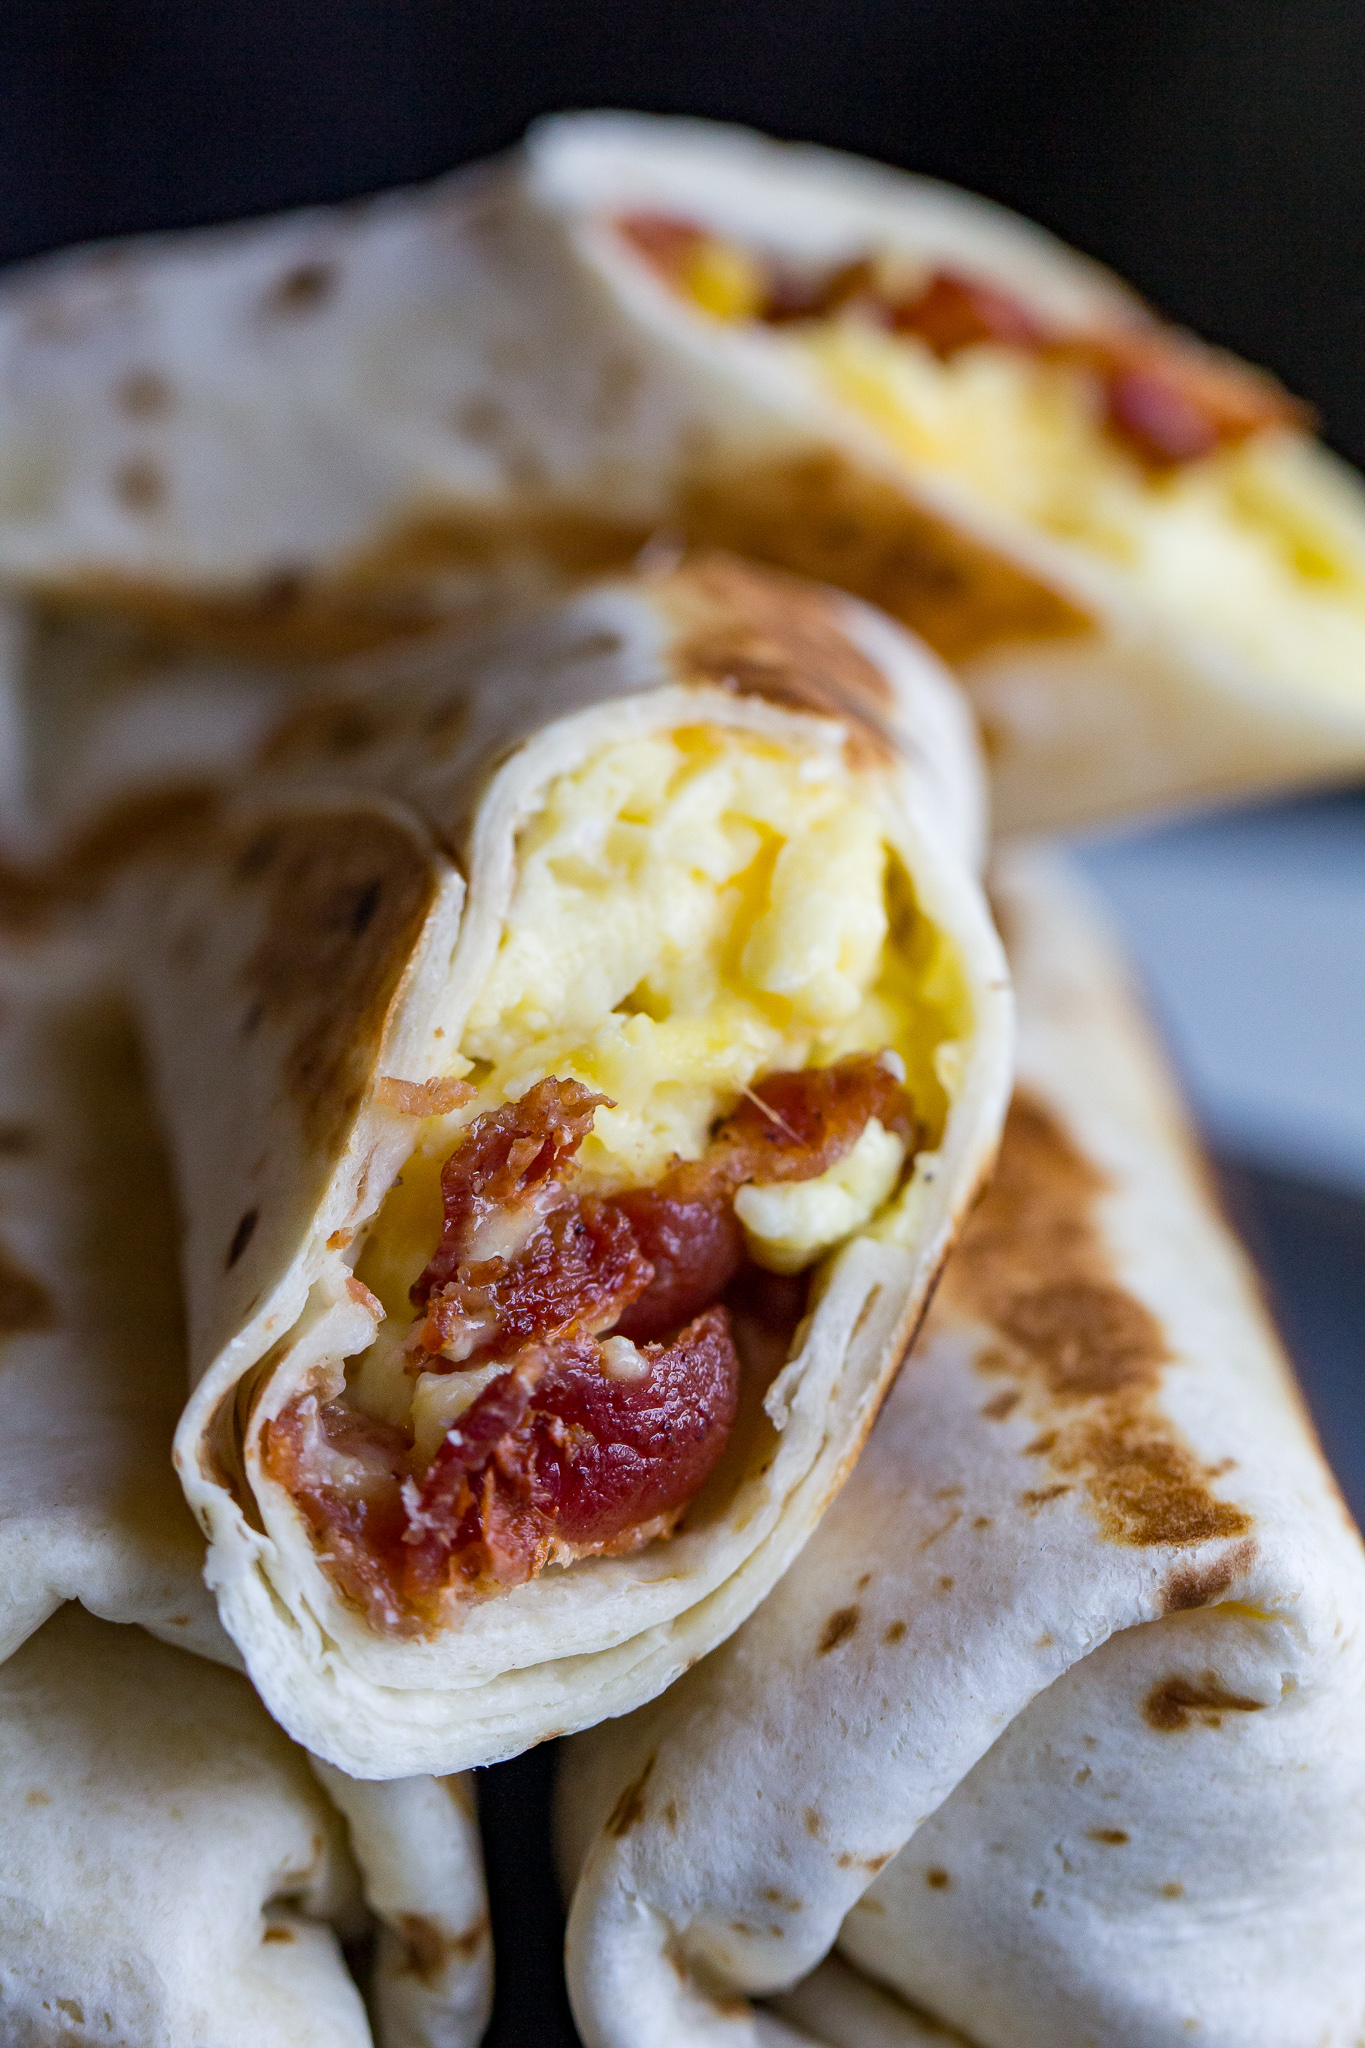 https://www.orwhateveryoudo.com/wp-content/uploads/2020/03/Bacon-and-Egg-Breakfast-Wrap-03.jpg